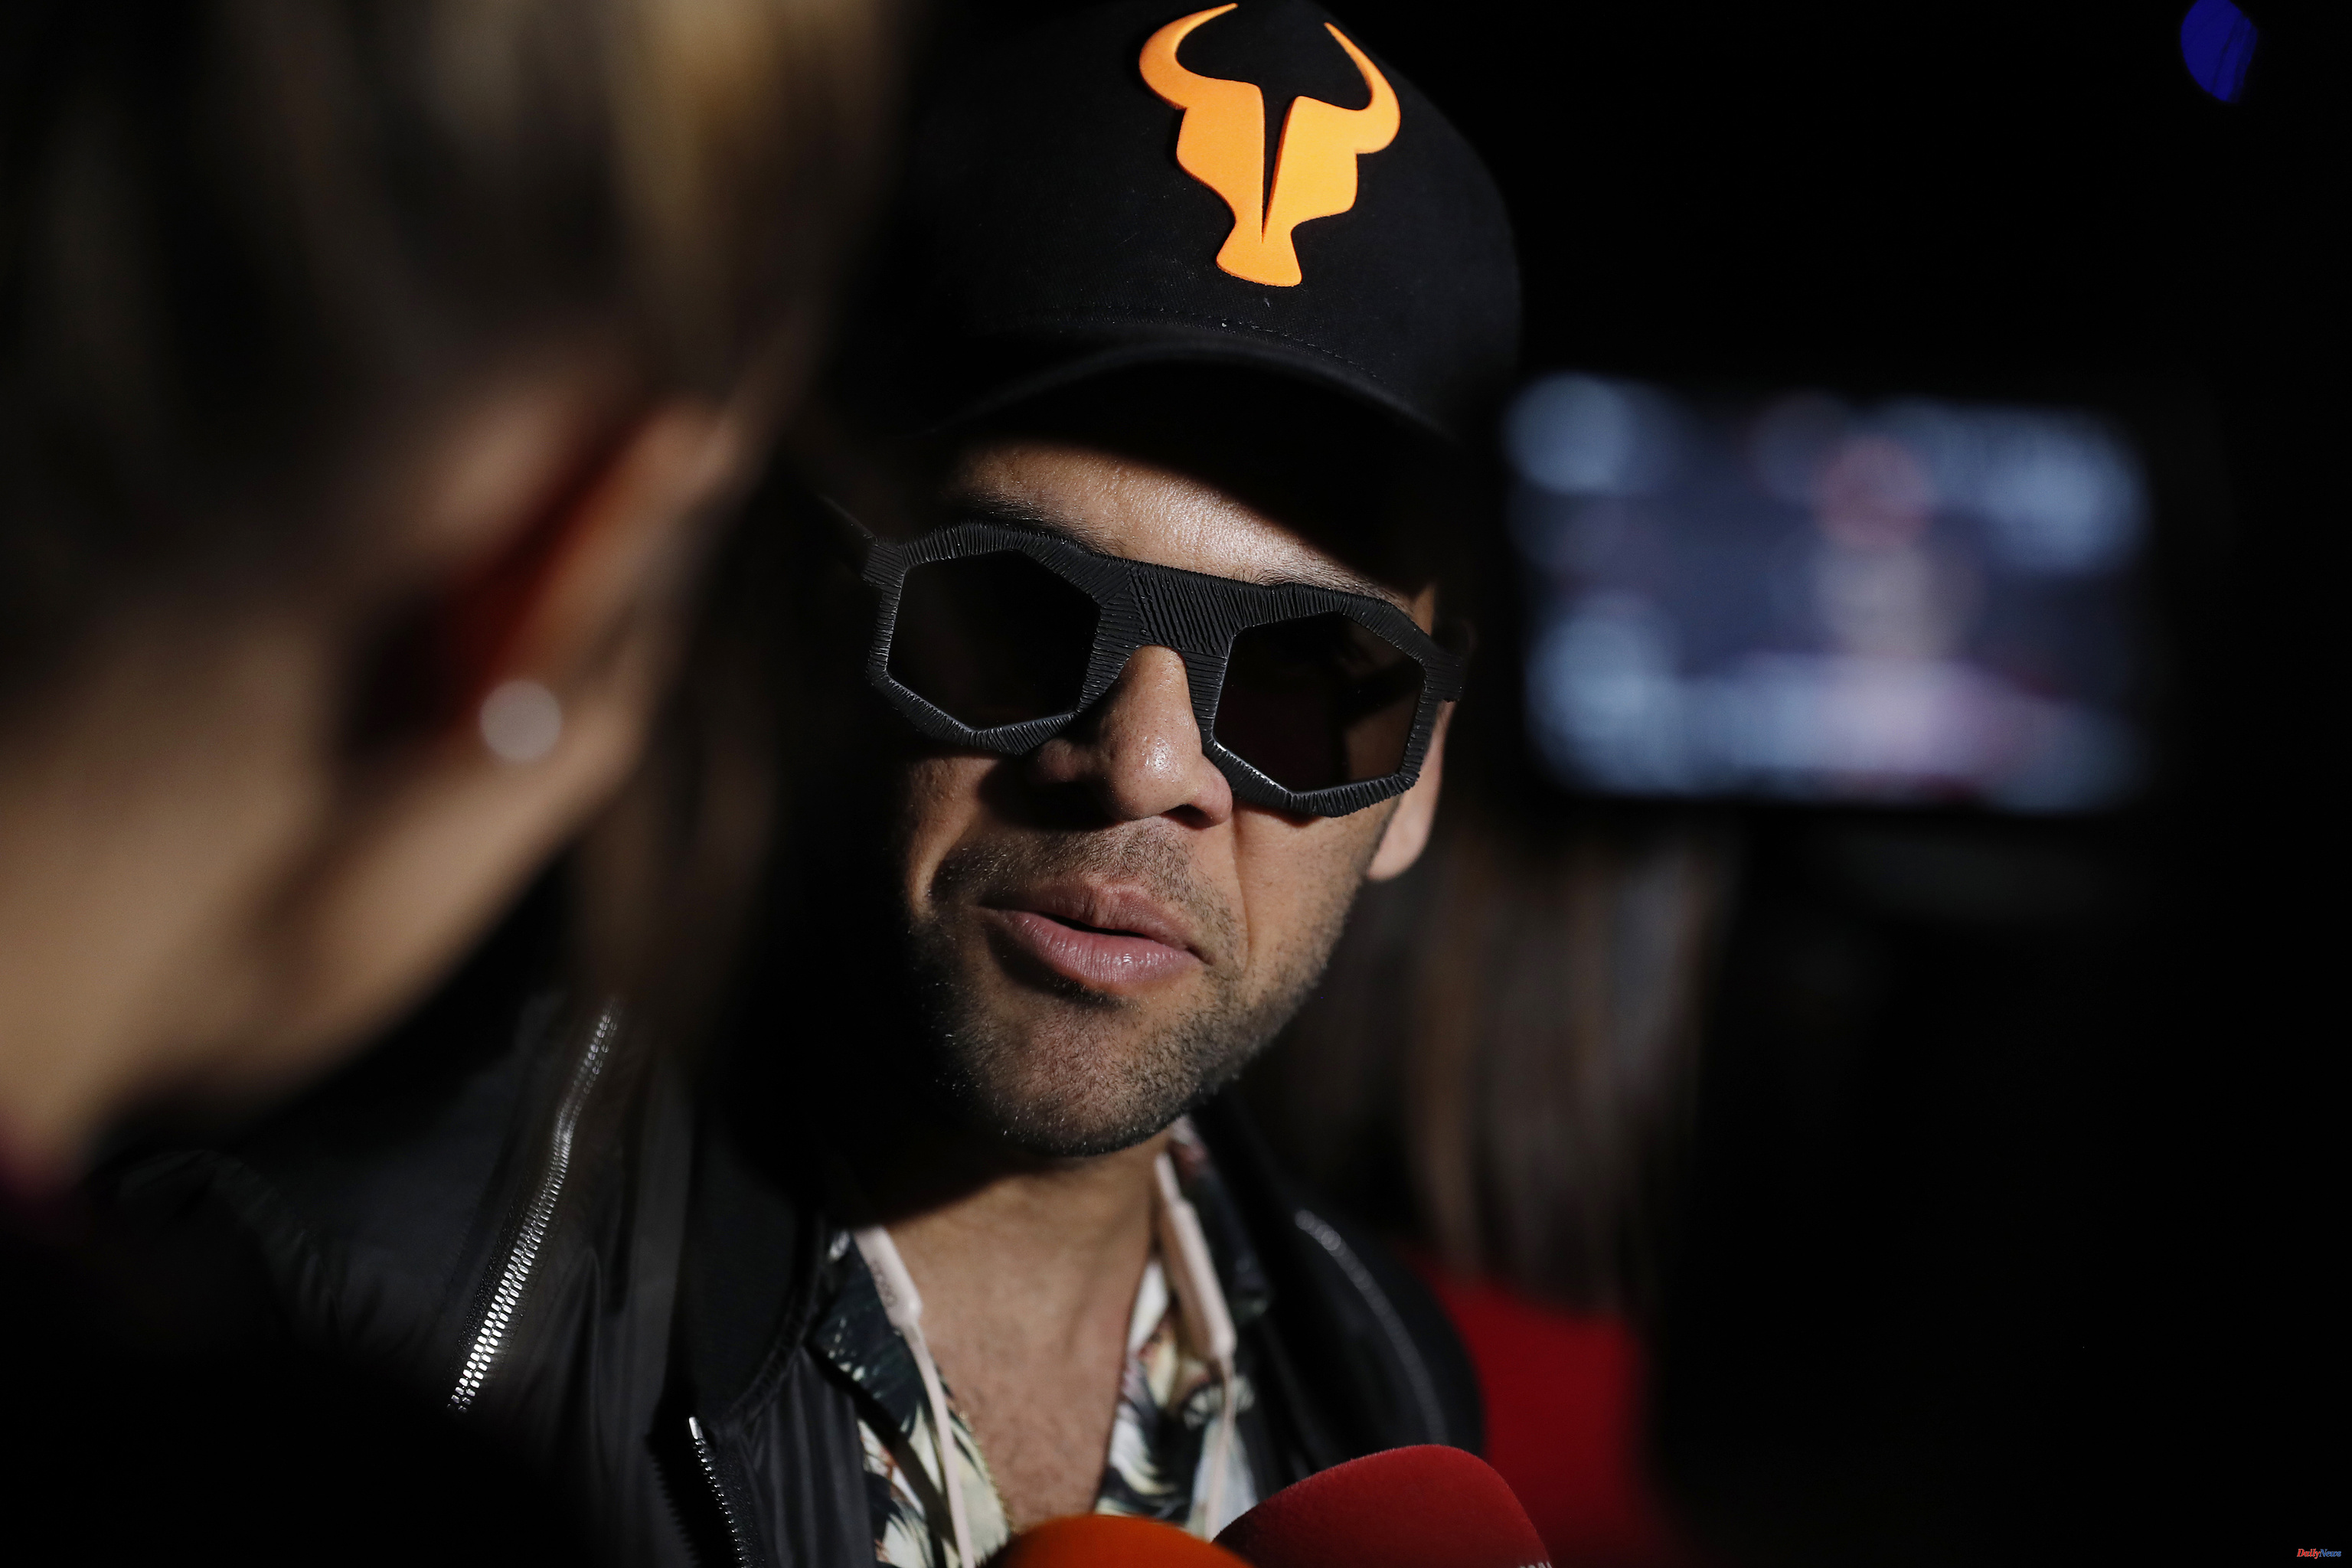 Courts Dani Alves defends himself: "The images deny in the most radical way the climate of terror that the complainant describes"